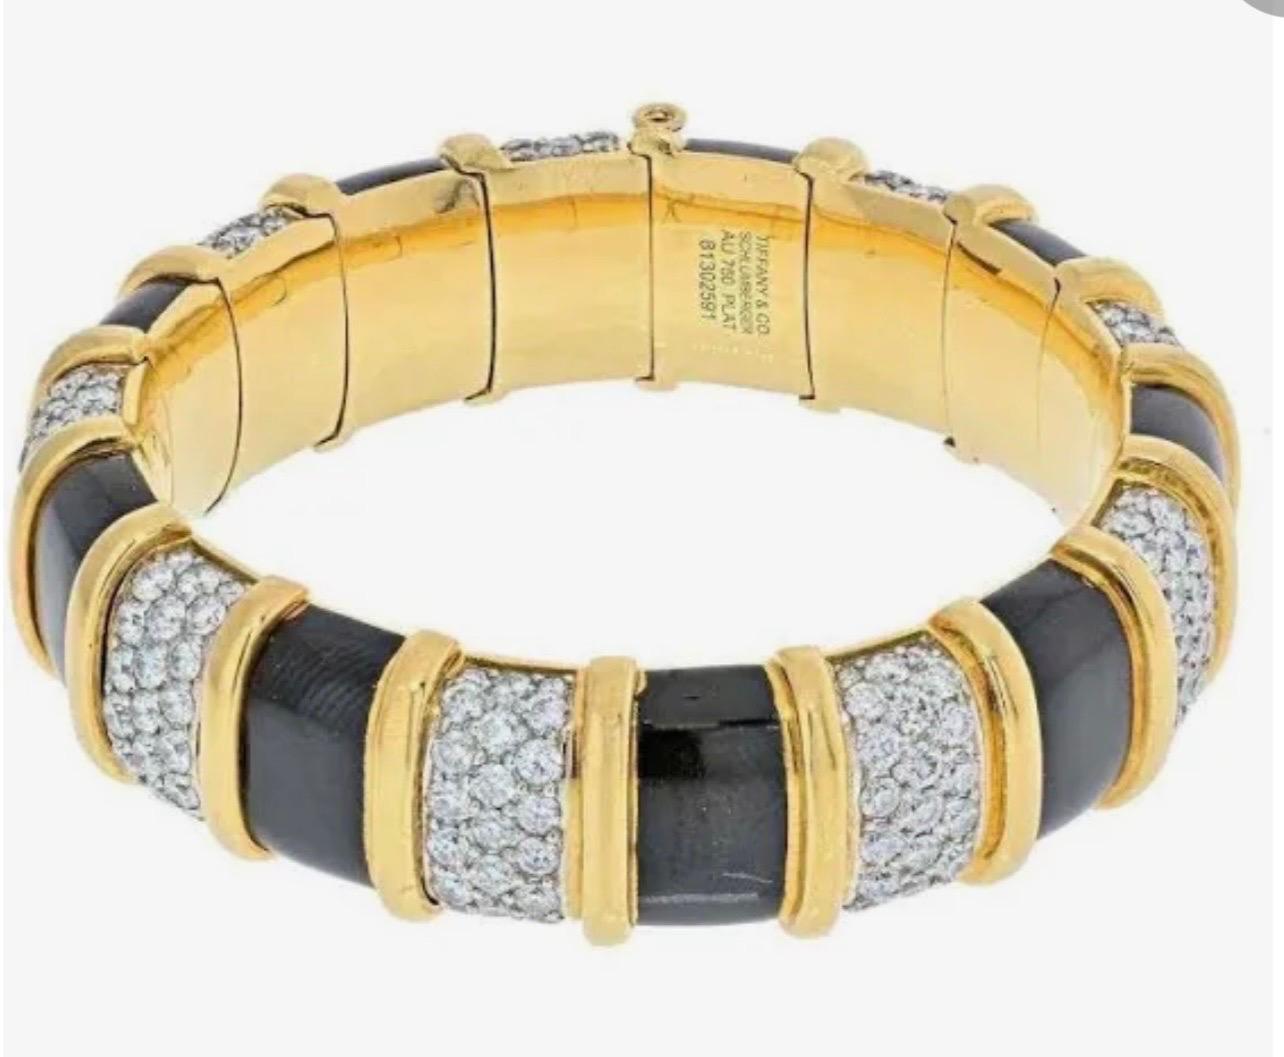 Enamel in perfect condition , No chip , no scratch
 Diamond Bracelet featuring 9 links with a total of 207 prong set round brilliant cut diamonds with a total estimated carat weight of 20 carats set in platinum and nine panels of Black enamel in 18